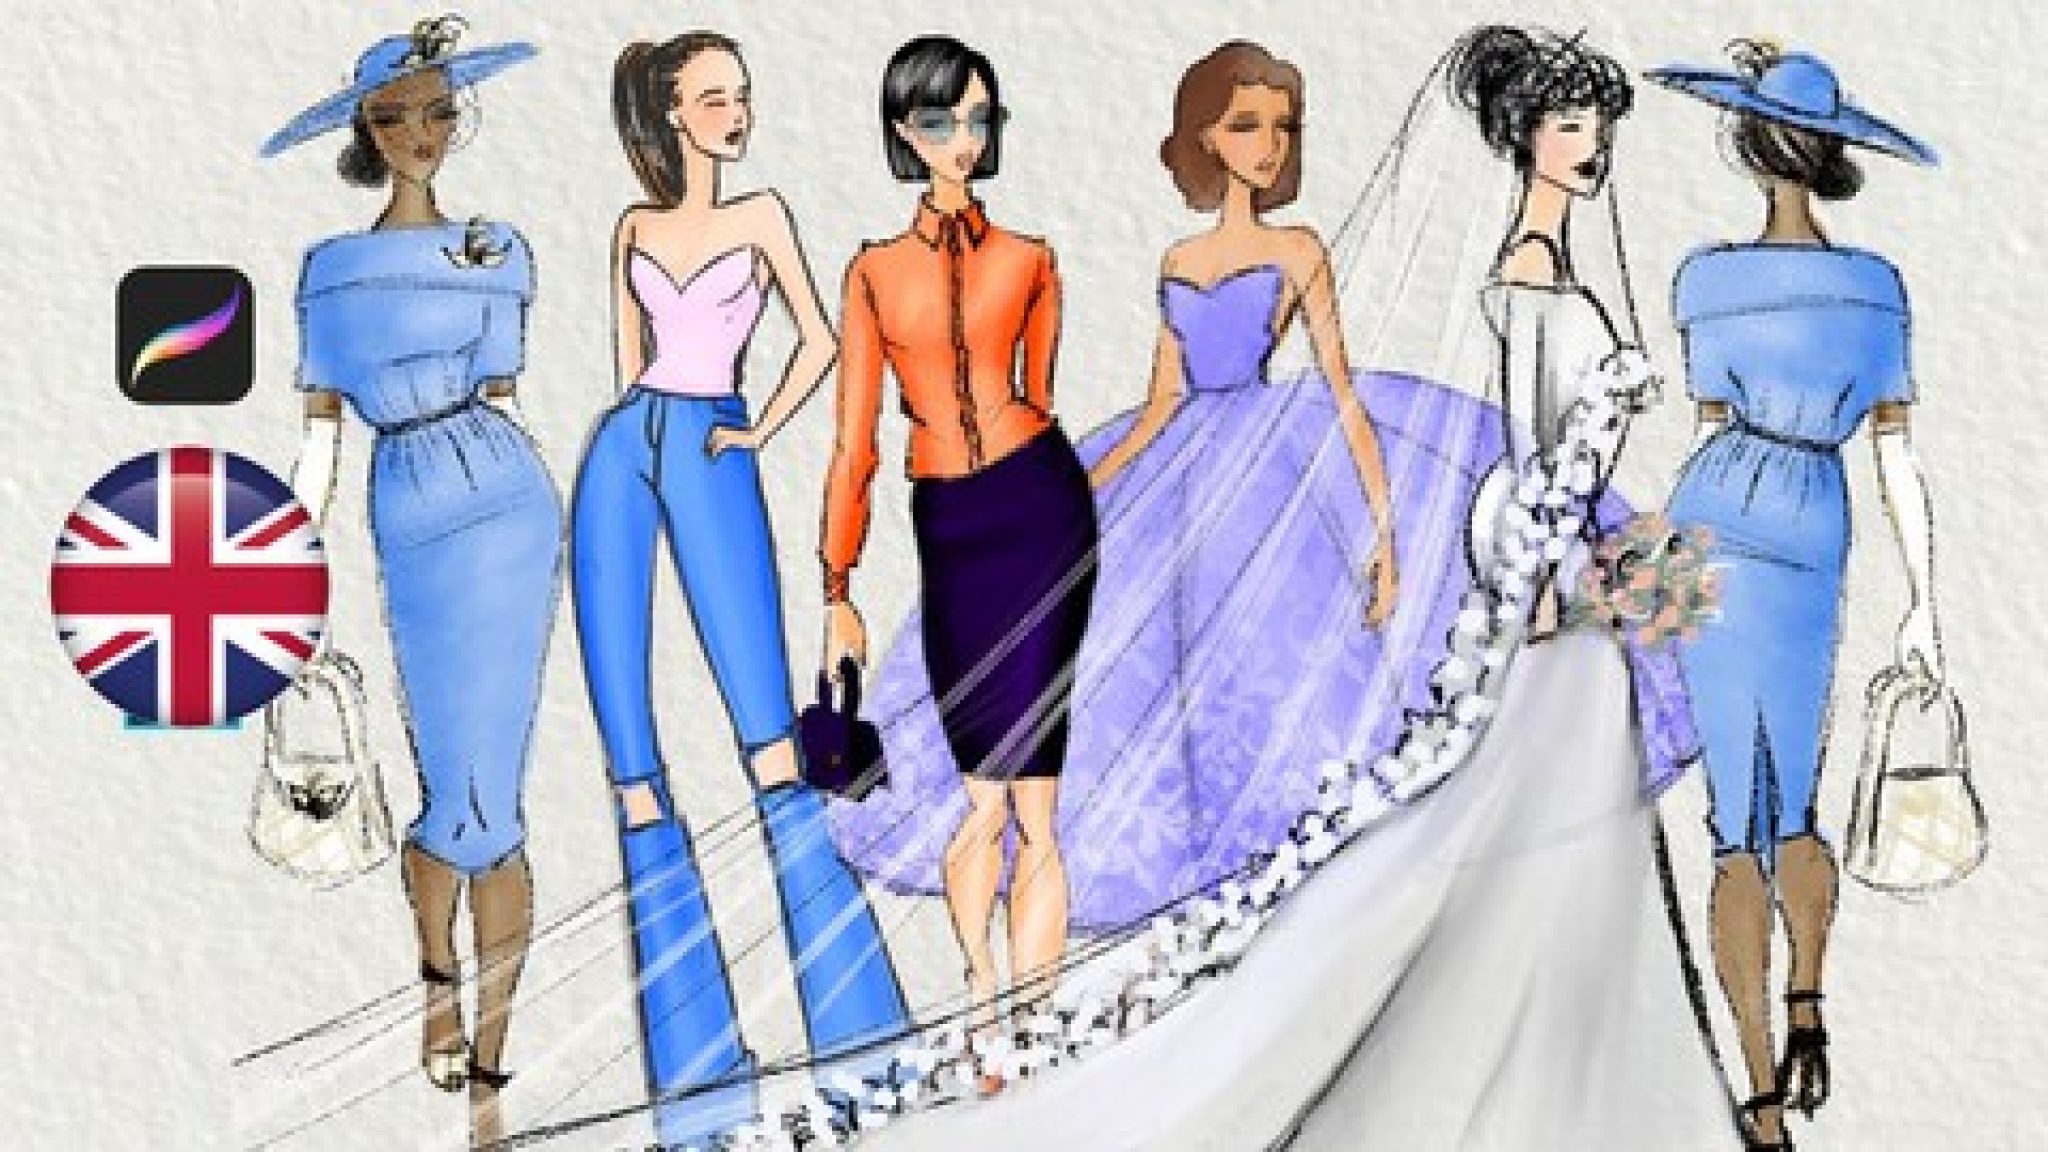 [100 OFF] The Ultimate Fashion Design Course with Certificate of